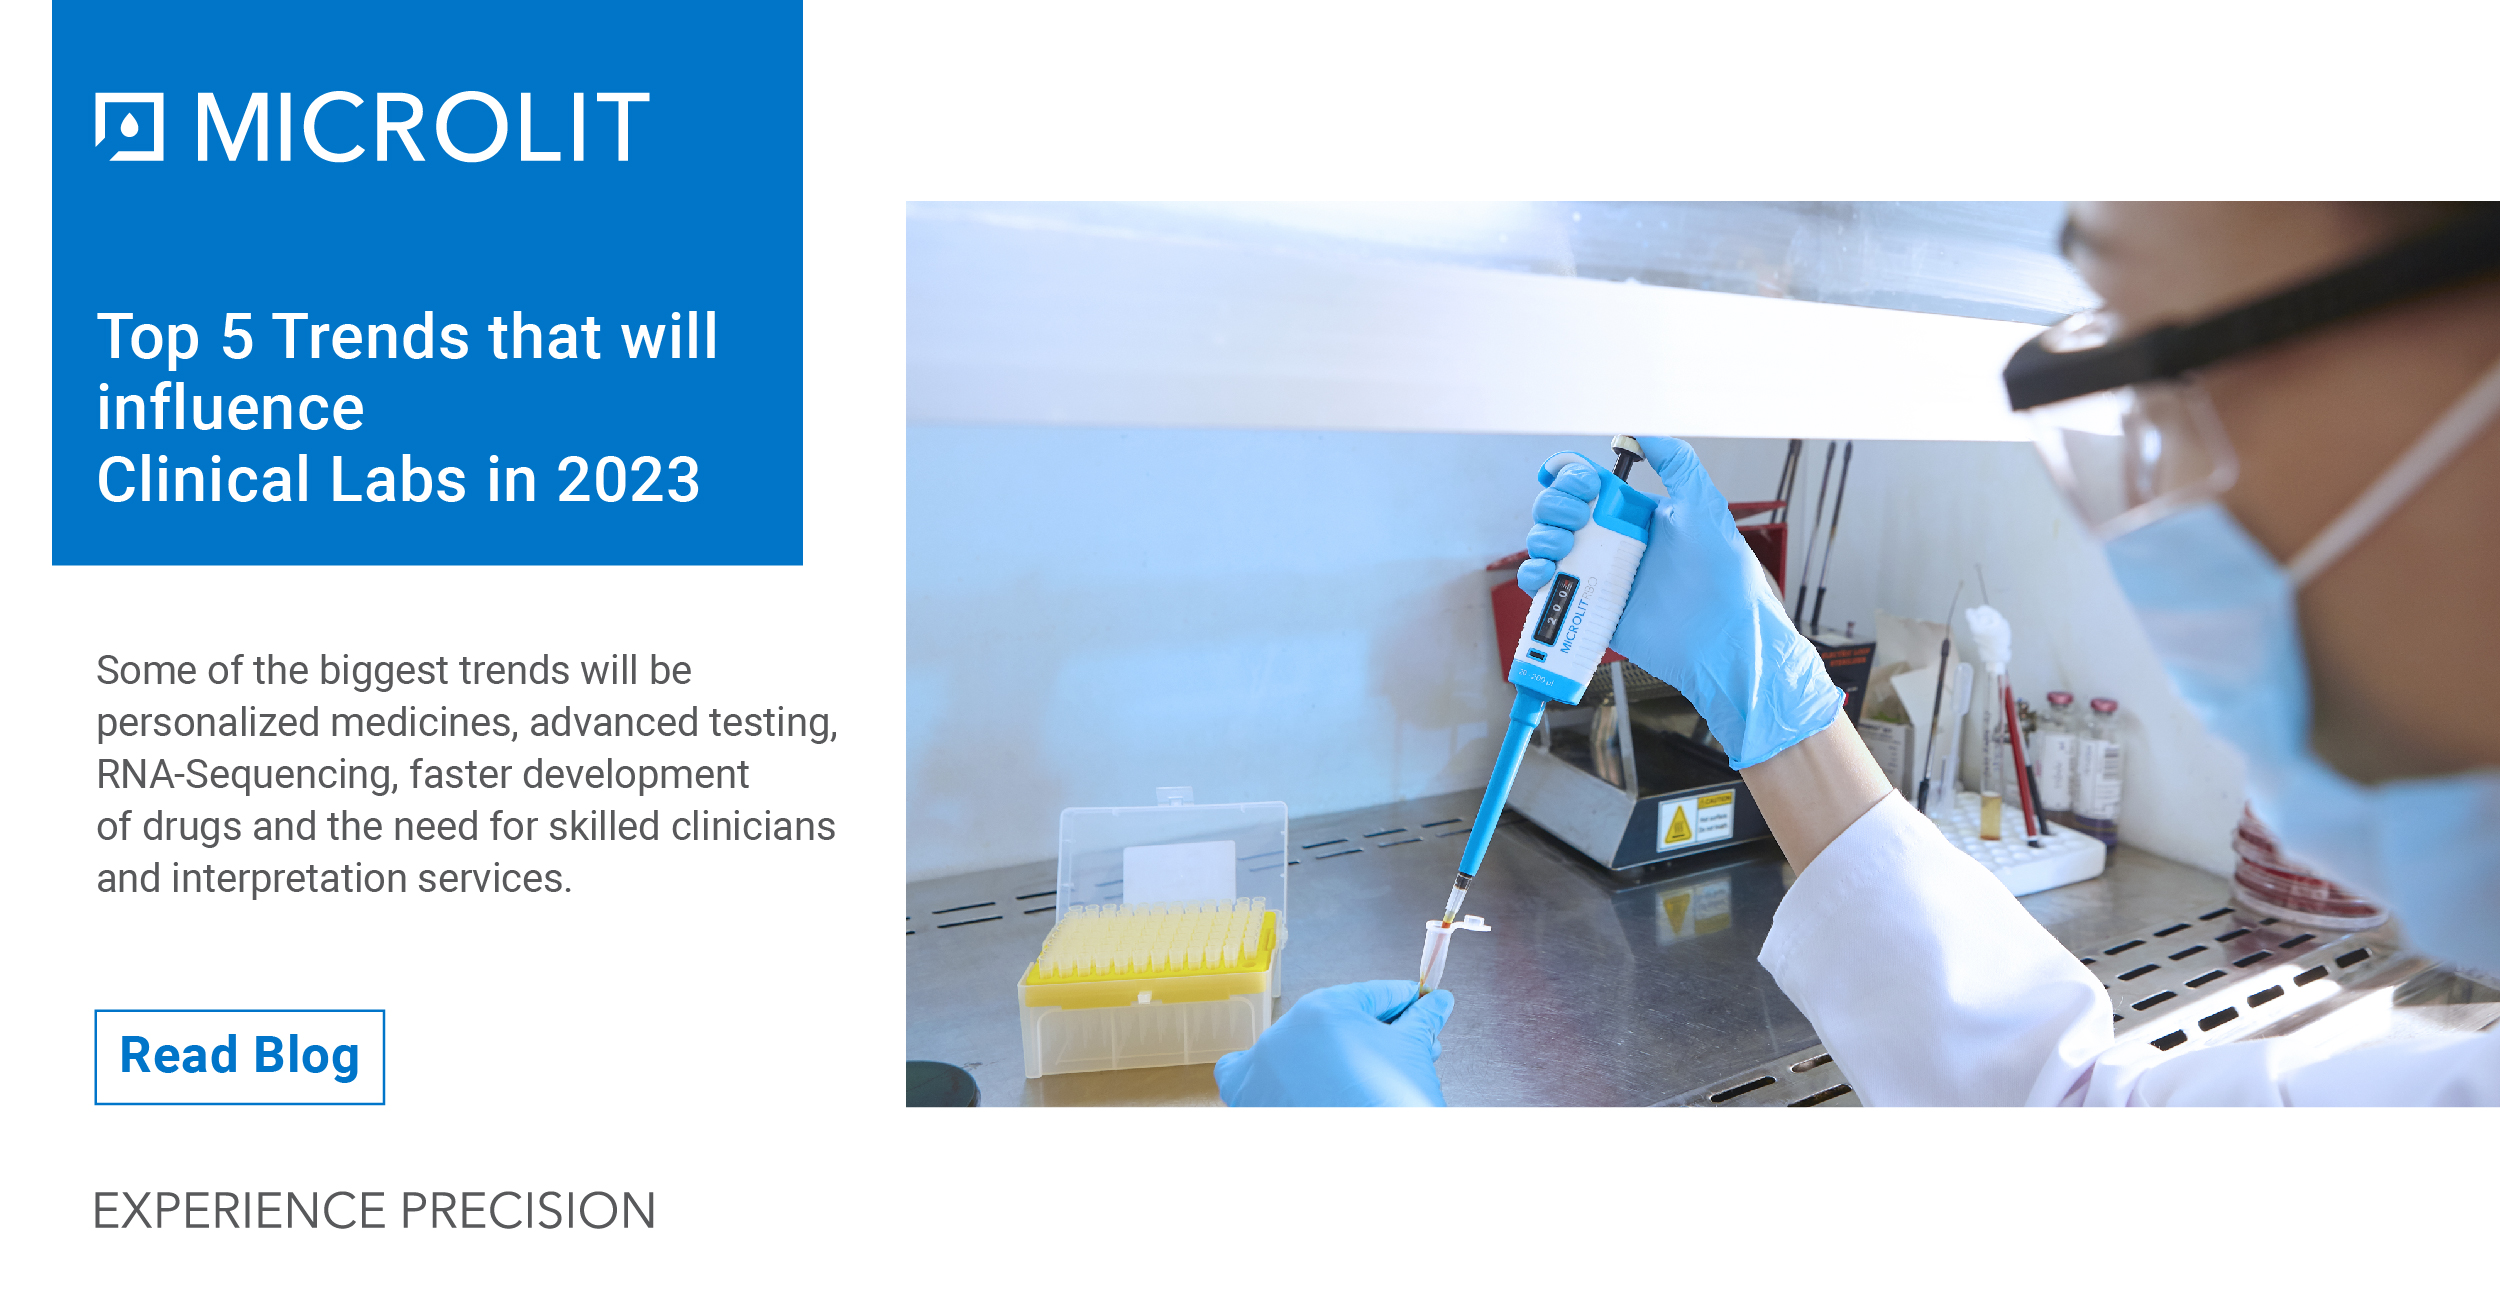 Top 5 Trends that will influence Clinical Labs in 2023